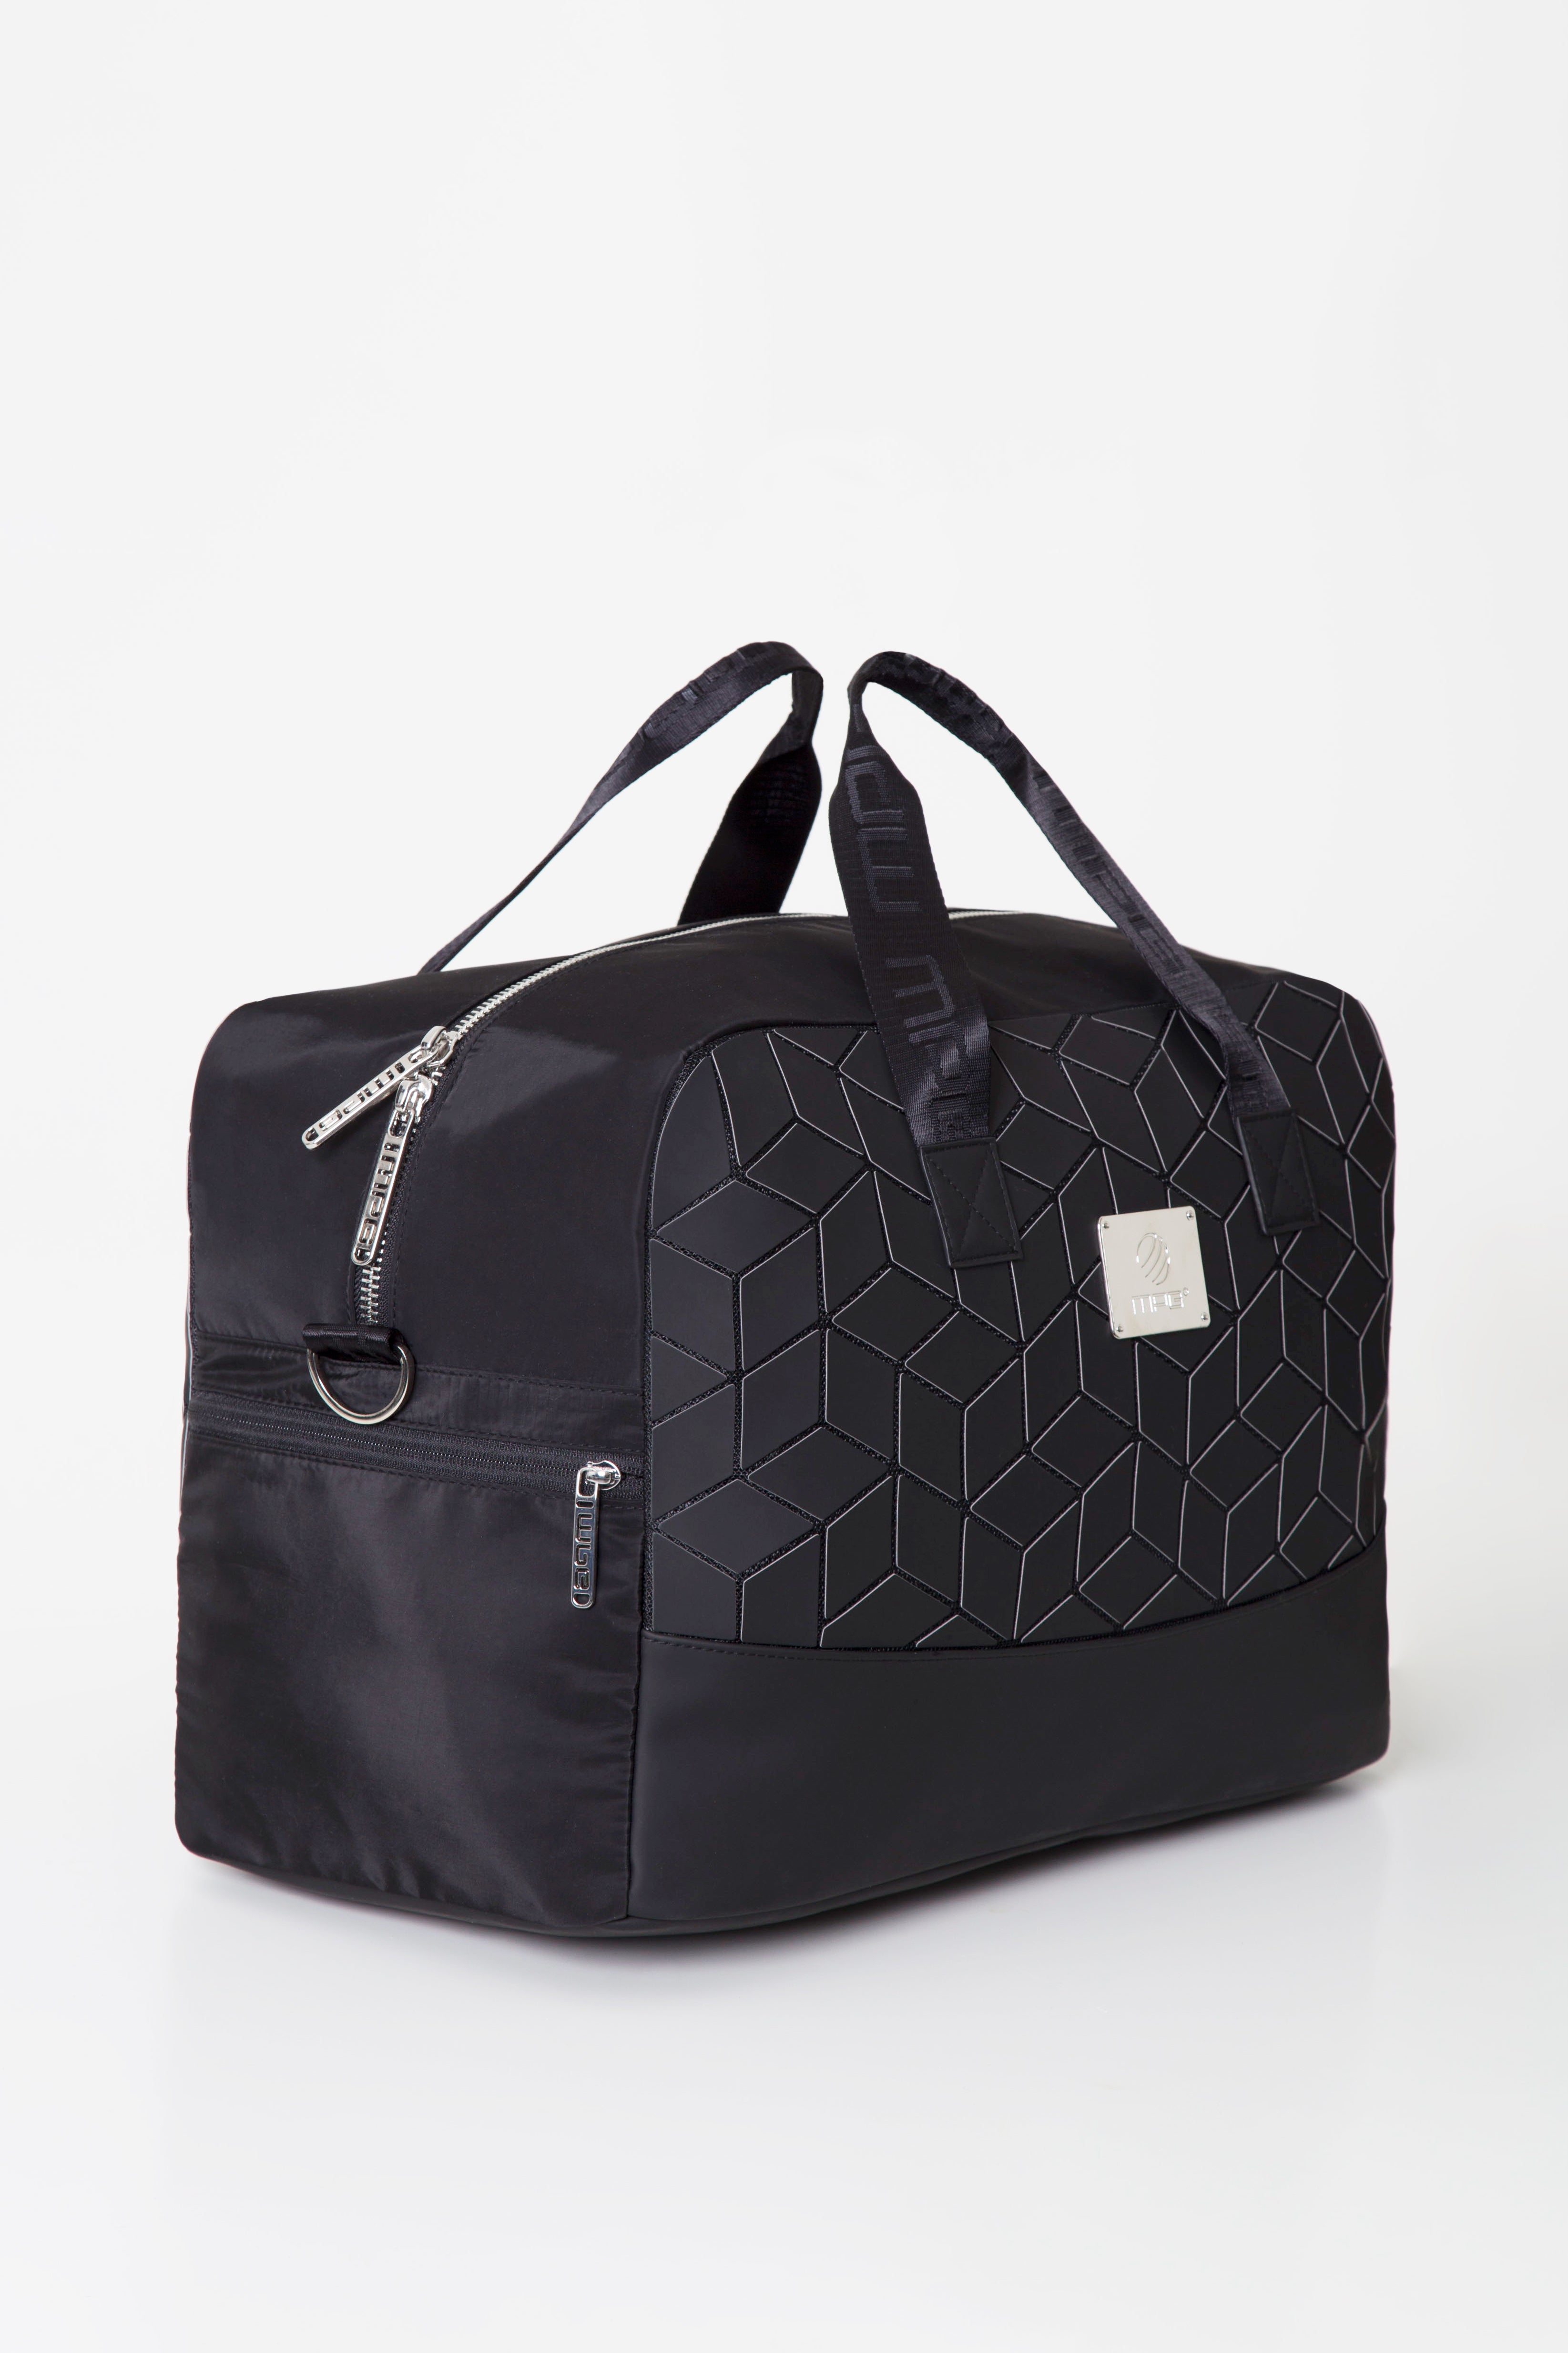 The Passenger Tote